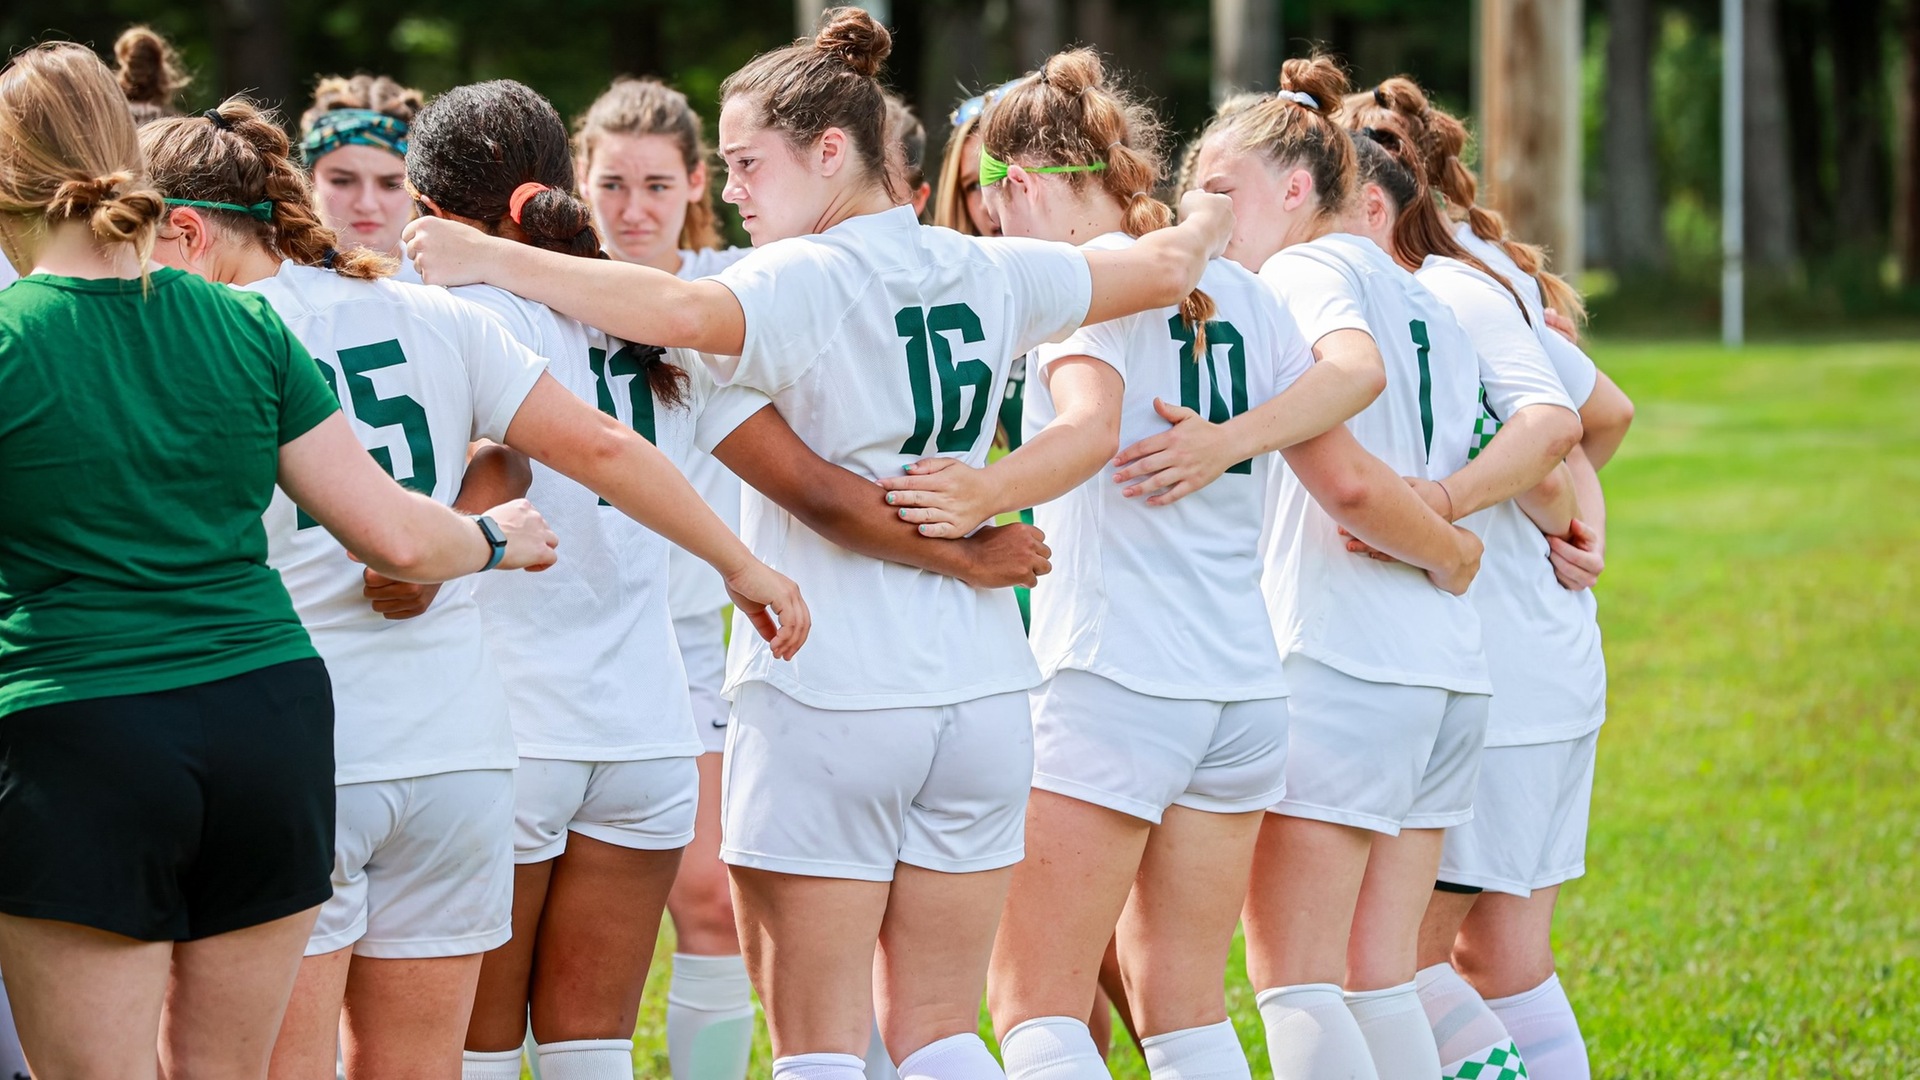 The Paul Smith's College women's soccer team gathers before a recent home game (Mercedes Rideout photo). Thumbnail